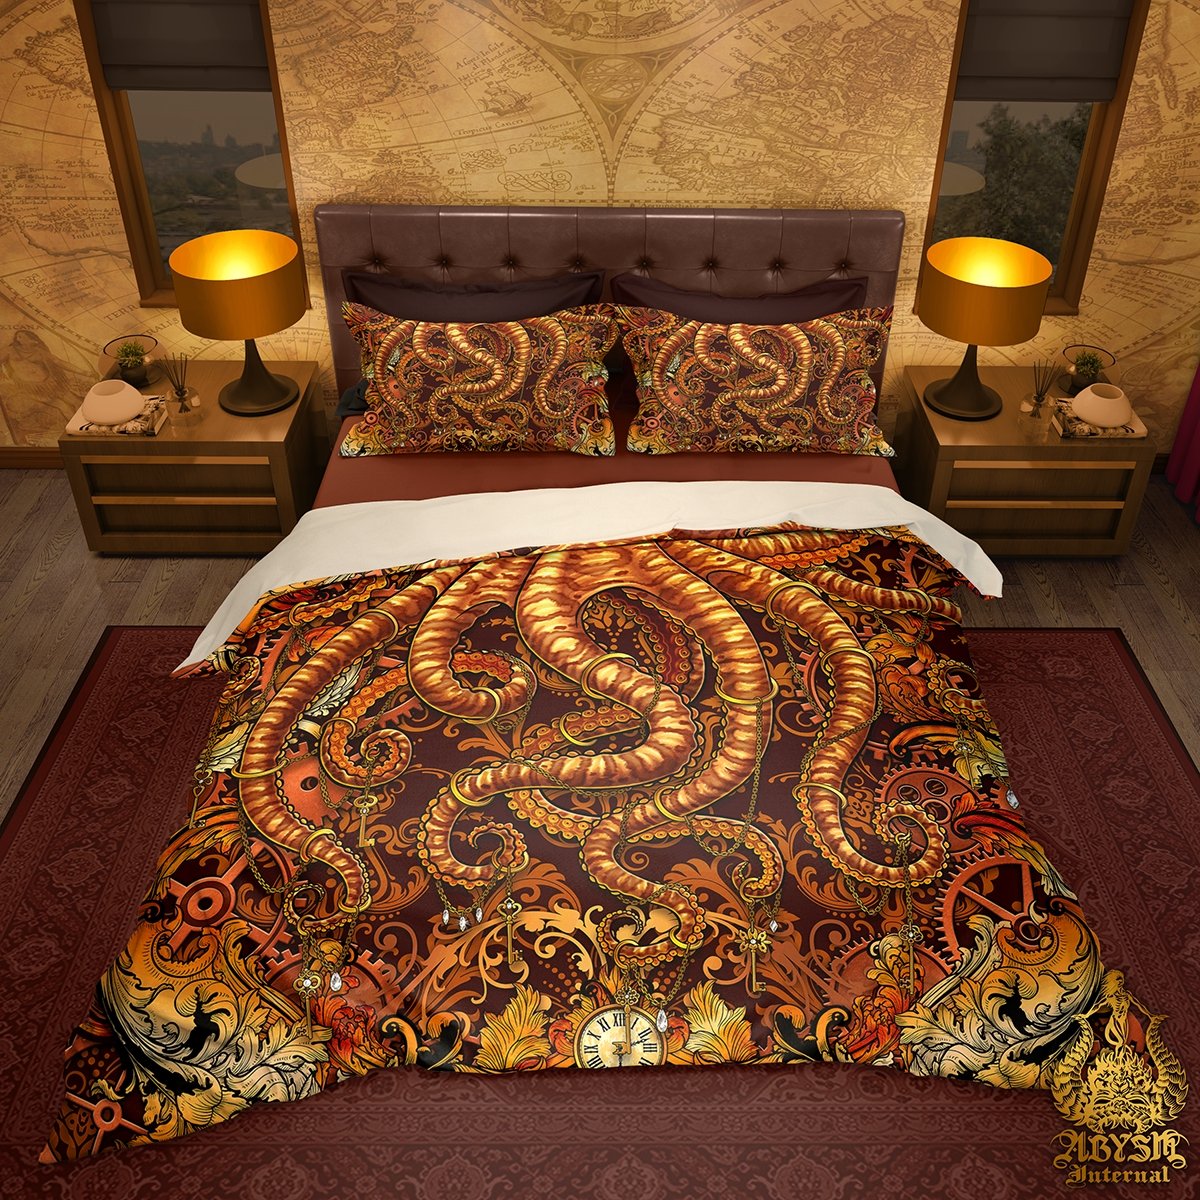 Steampunk Bedding Set, Comforter and Duvet, Beach Bed Cover, Coastal Bedroom Decor, King, Queen and Twin Size - Octopus - Abysm Internal